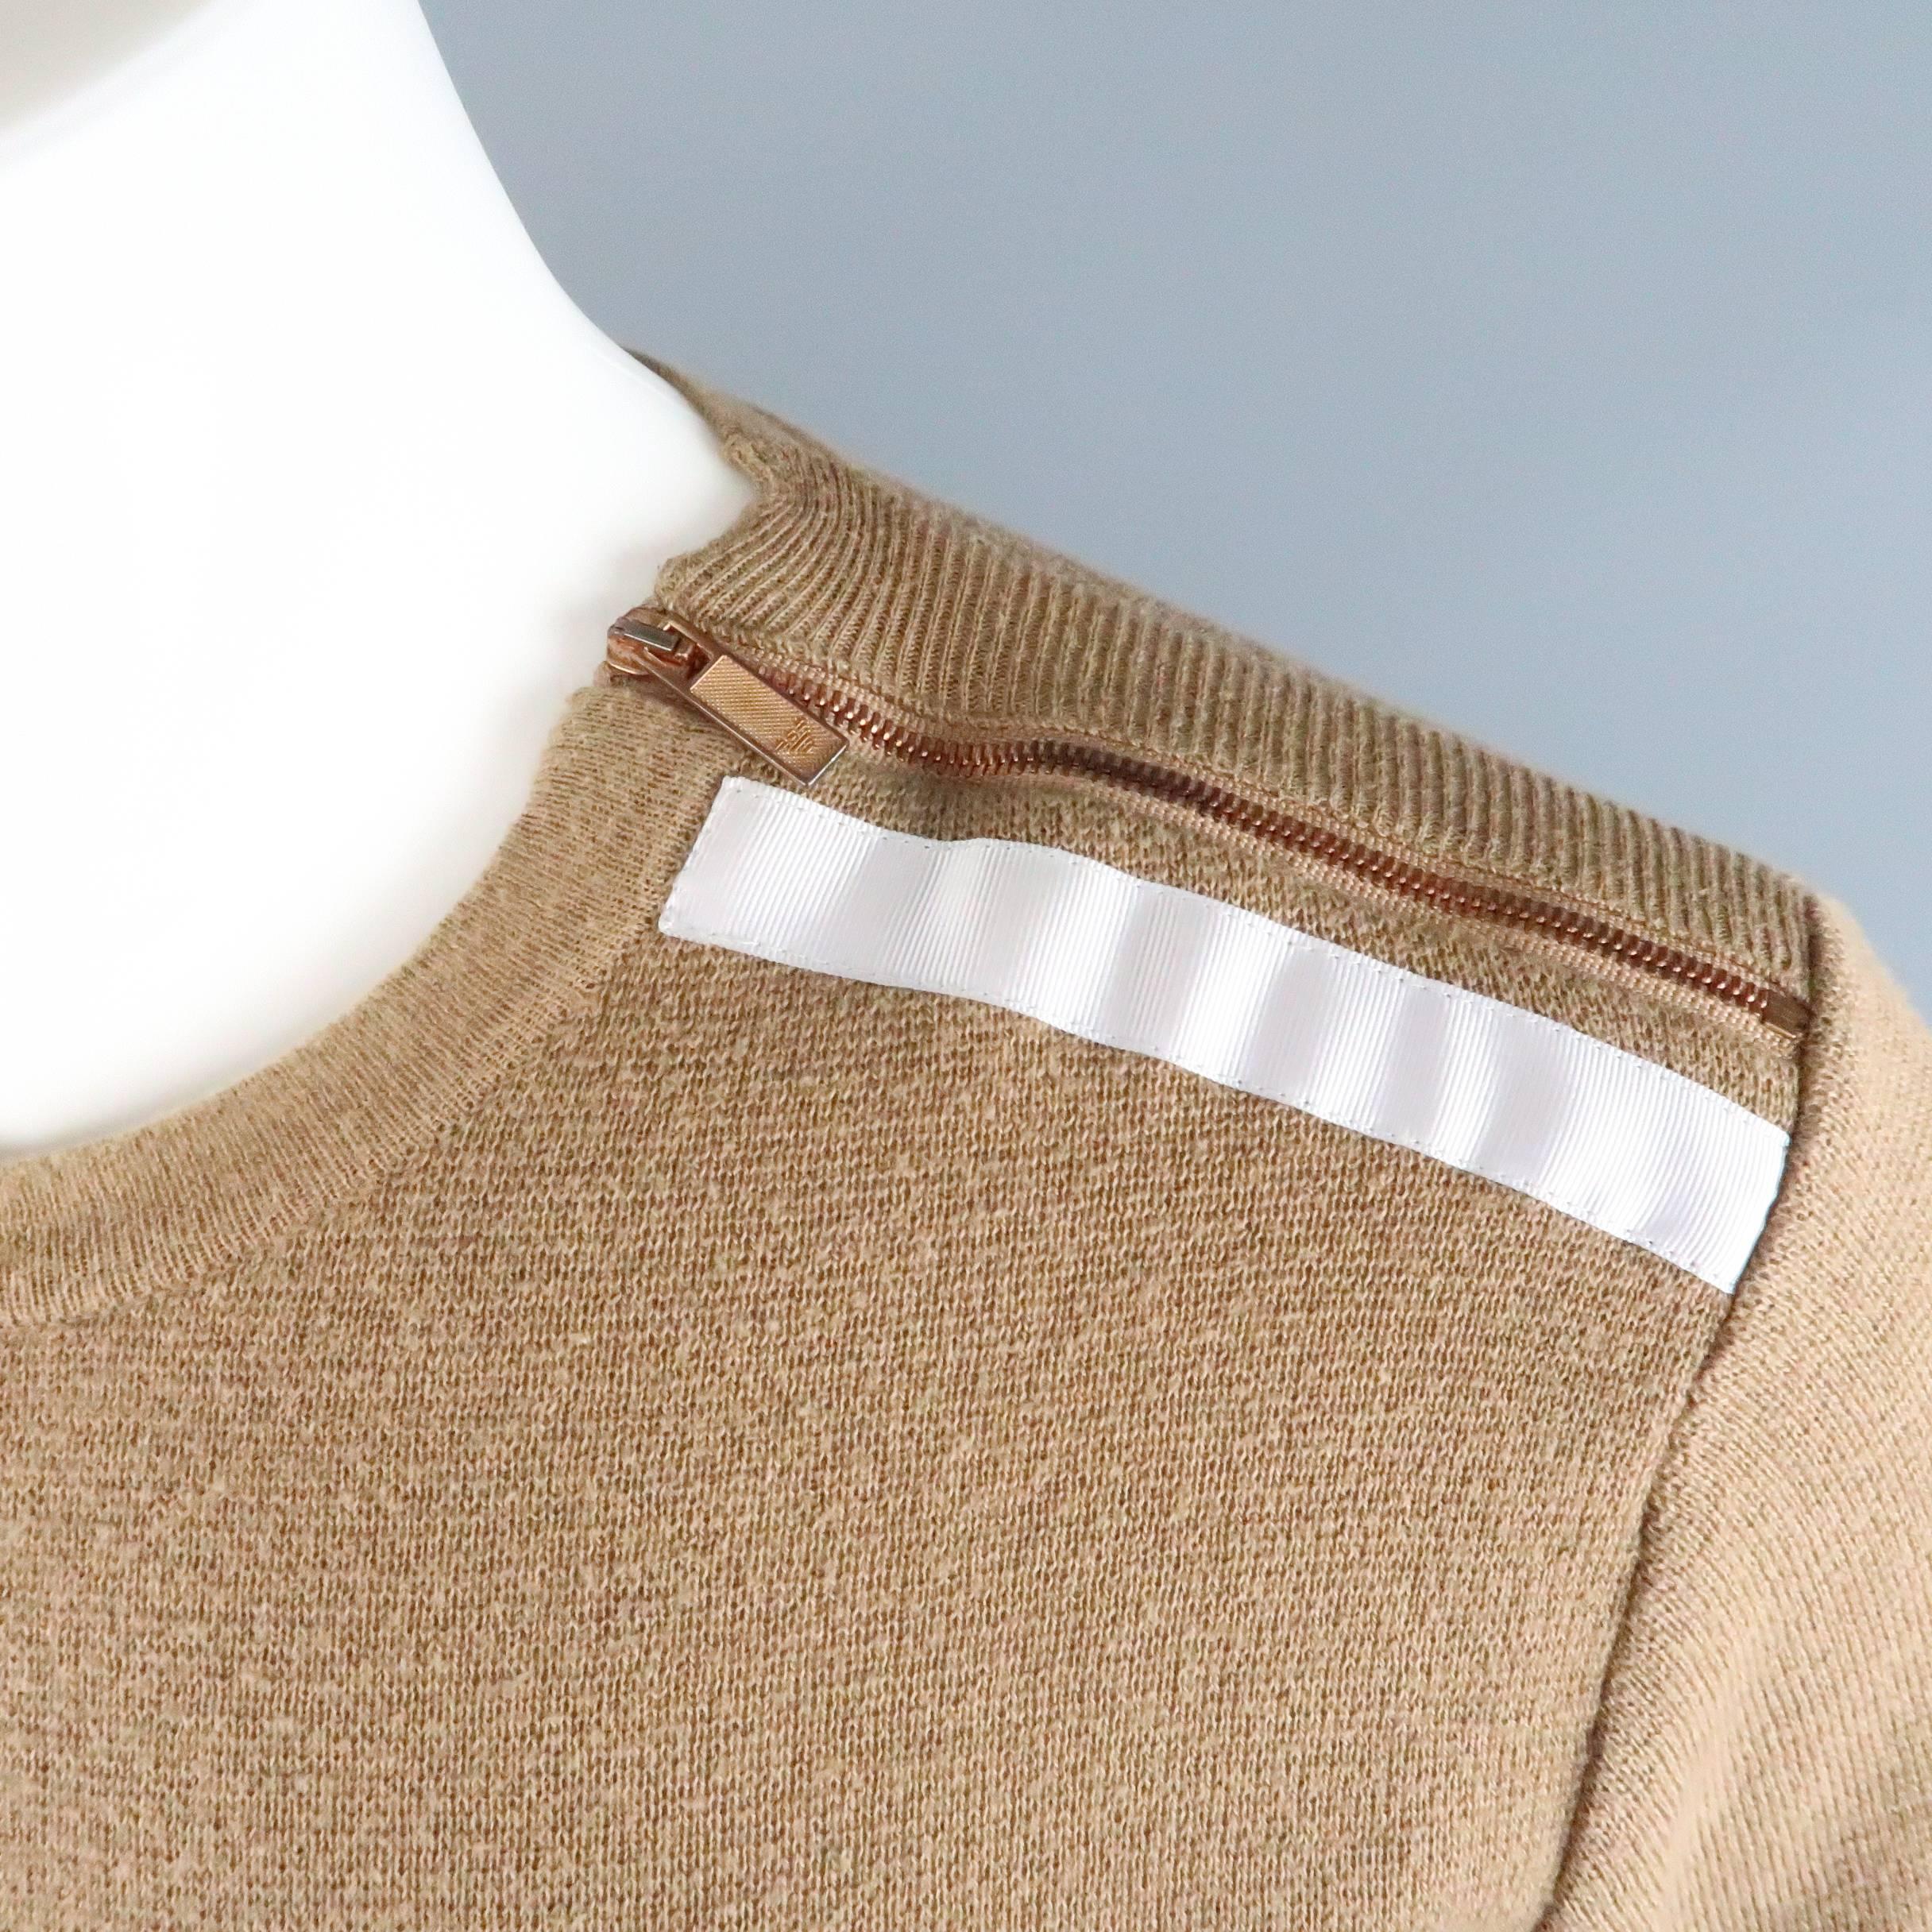 EMPORIO ARMANI pullover sweater comes in tan camel wool cotton blend knit and features a crewneck with silver stripe detailed, bronze tone zip shouder, embroidered logo hem, and layered sight gray layered cuffs. Discoloration on zipper. As-Is.
